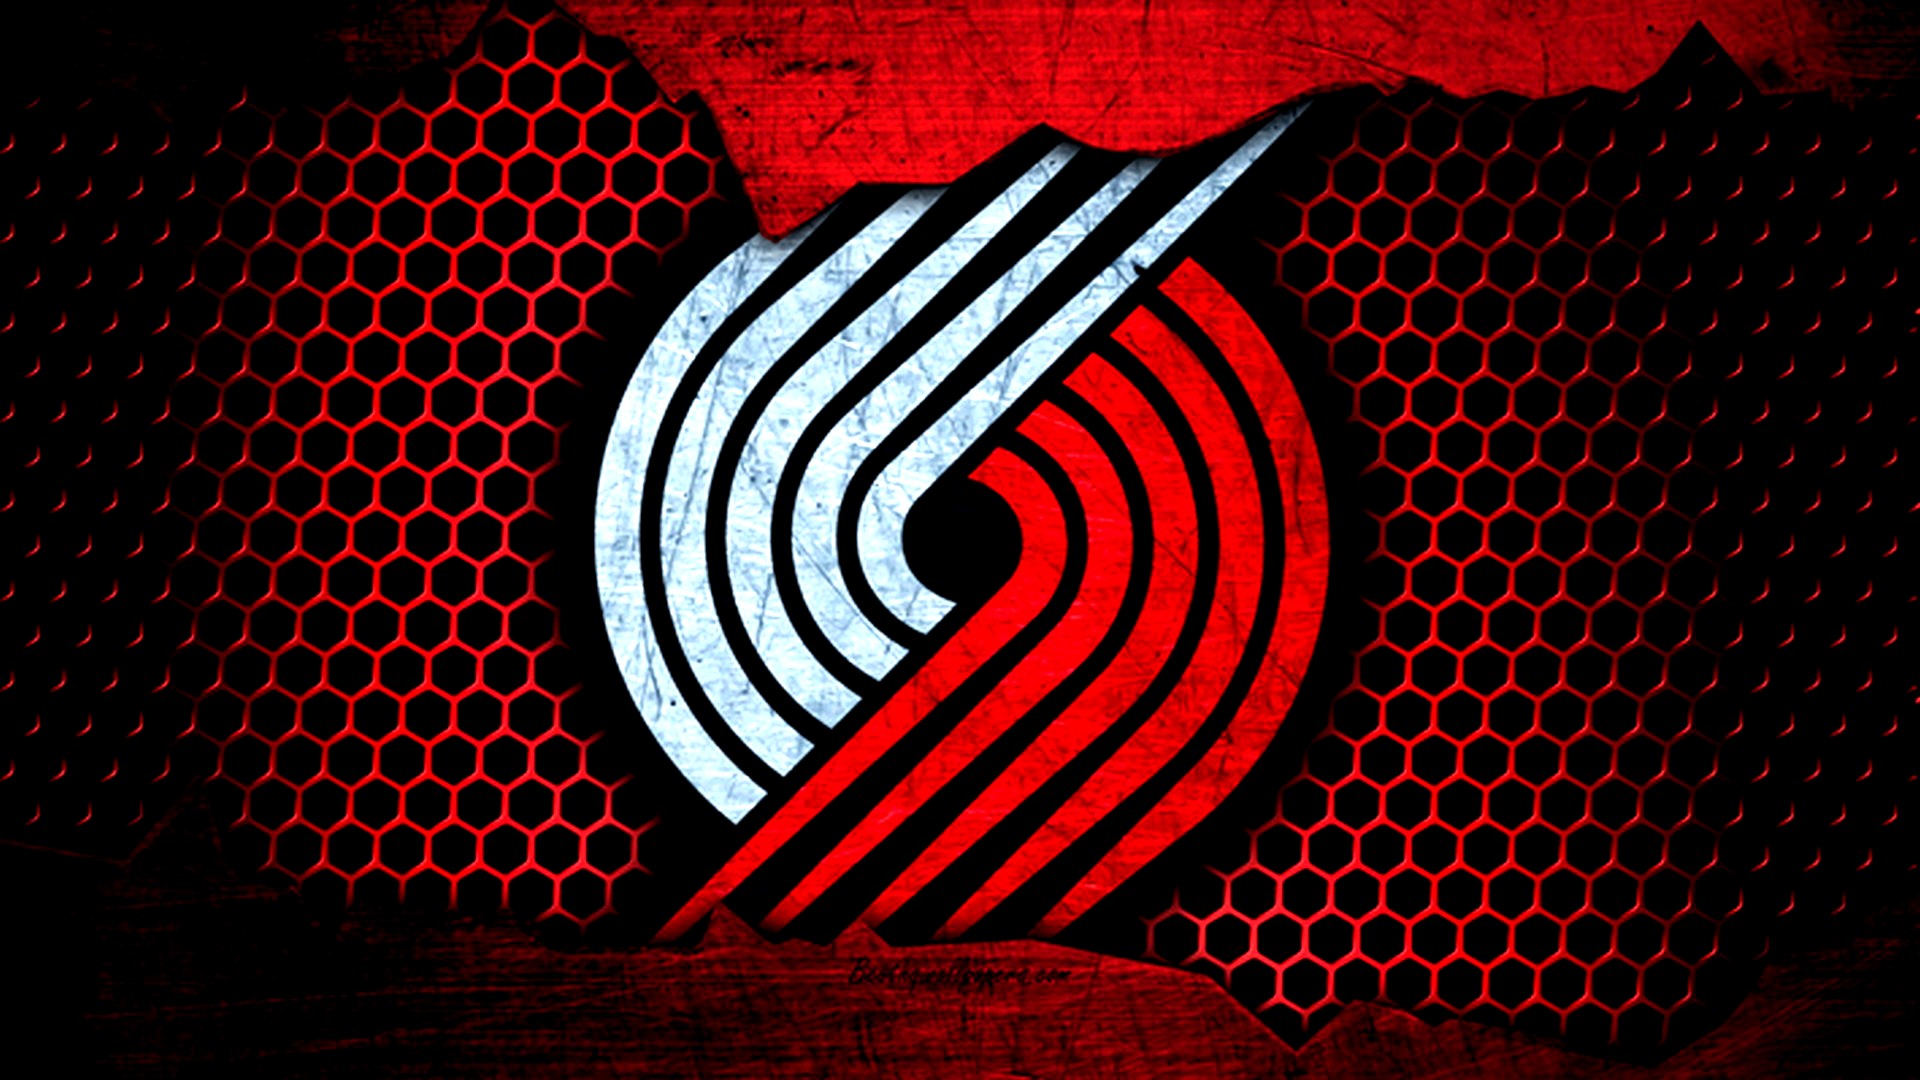 Portland Trail Blazers For PC Wallpaper with high-resolution 1920x1080 pixel. You can use this wallpaper for your Desktop Computer Backgrounds, Windows or Mac Screensavers, iPhone Lock screen, Tablet or Android and another Mobile Phone device